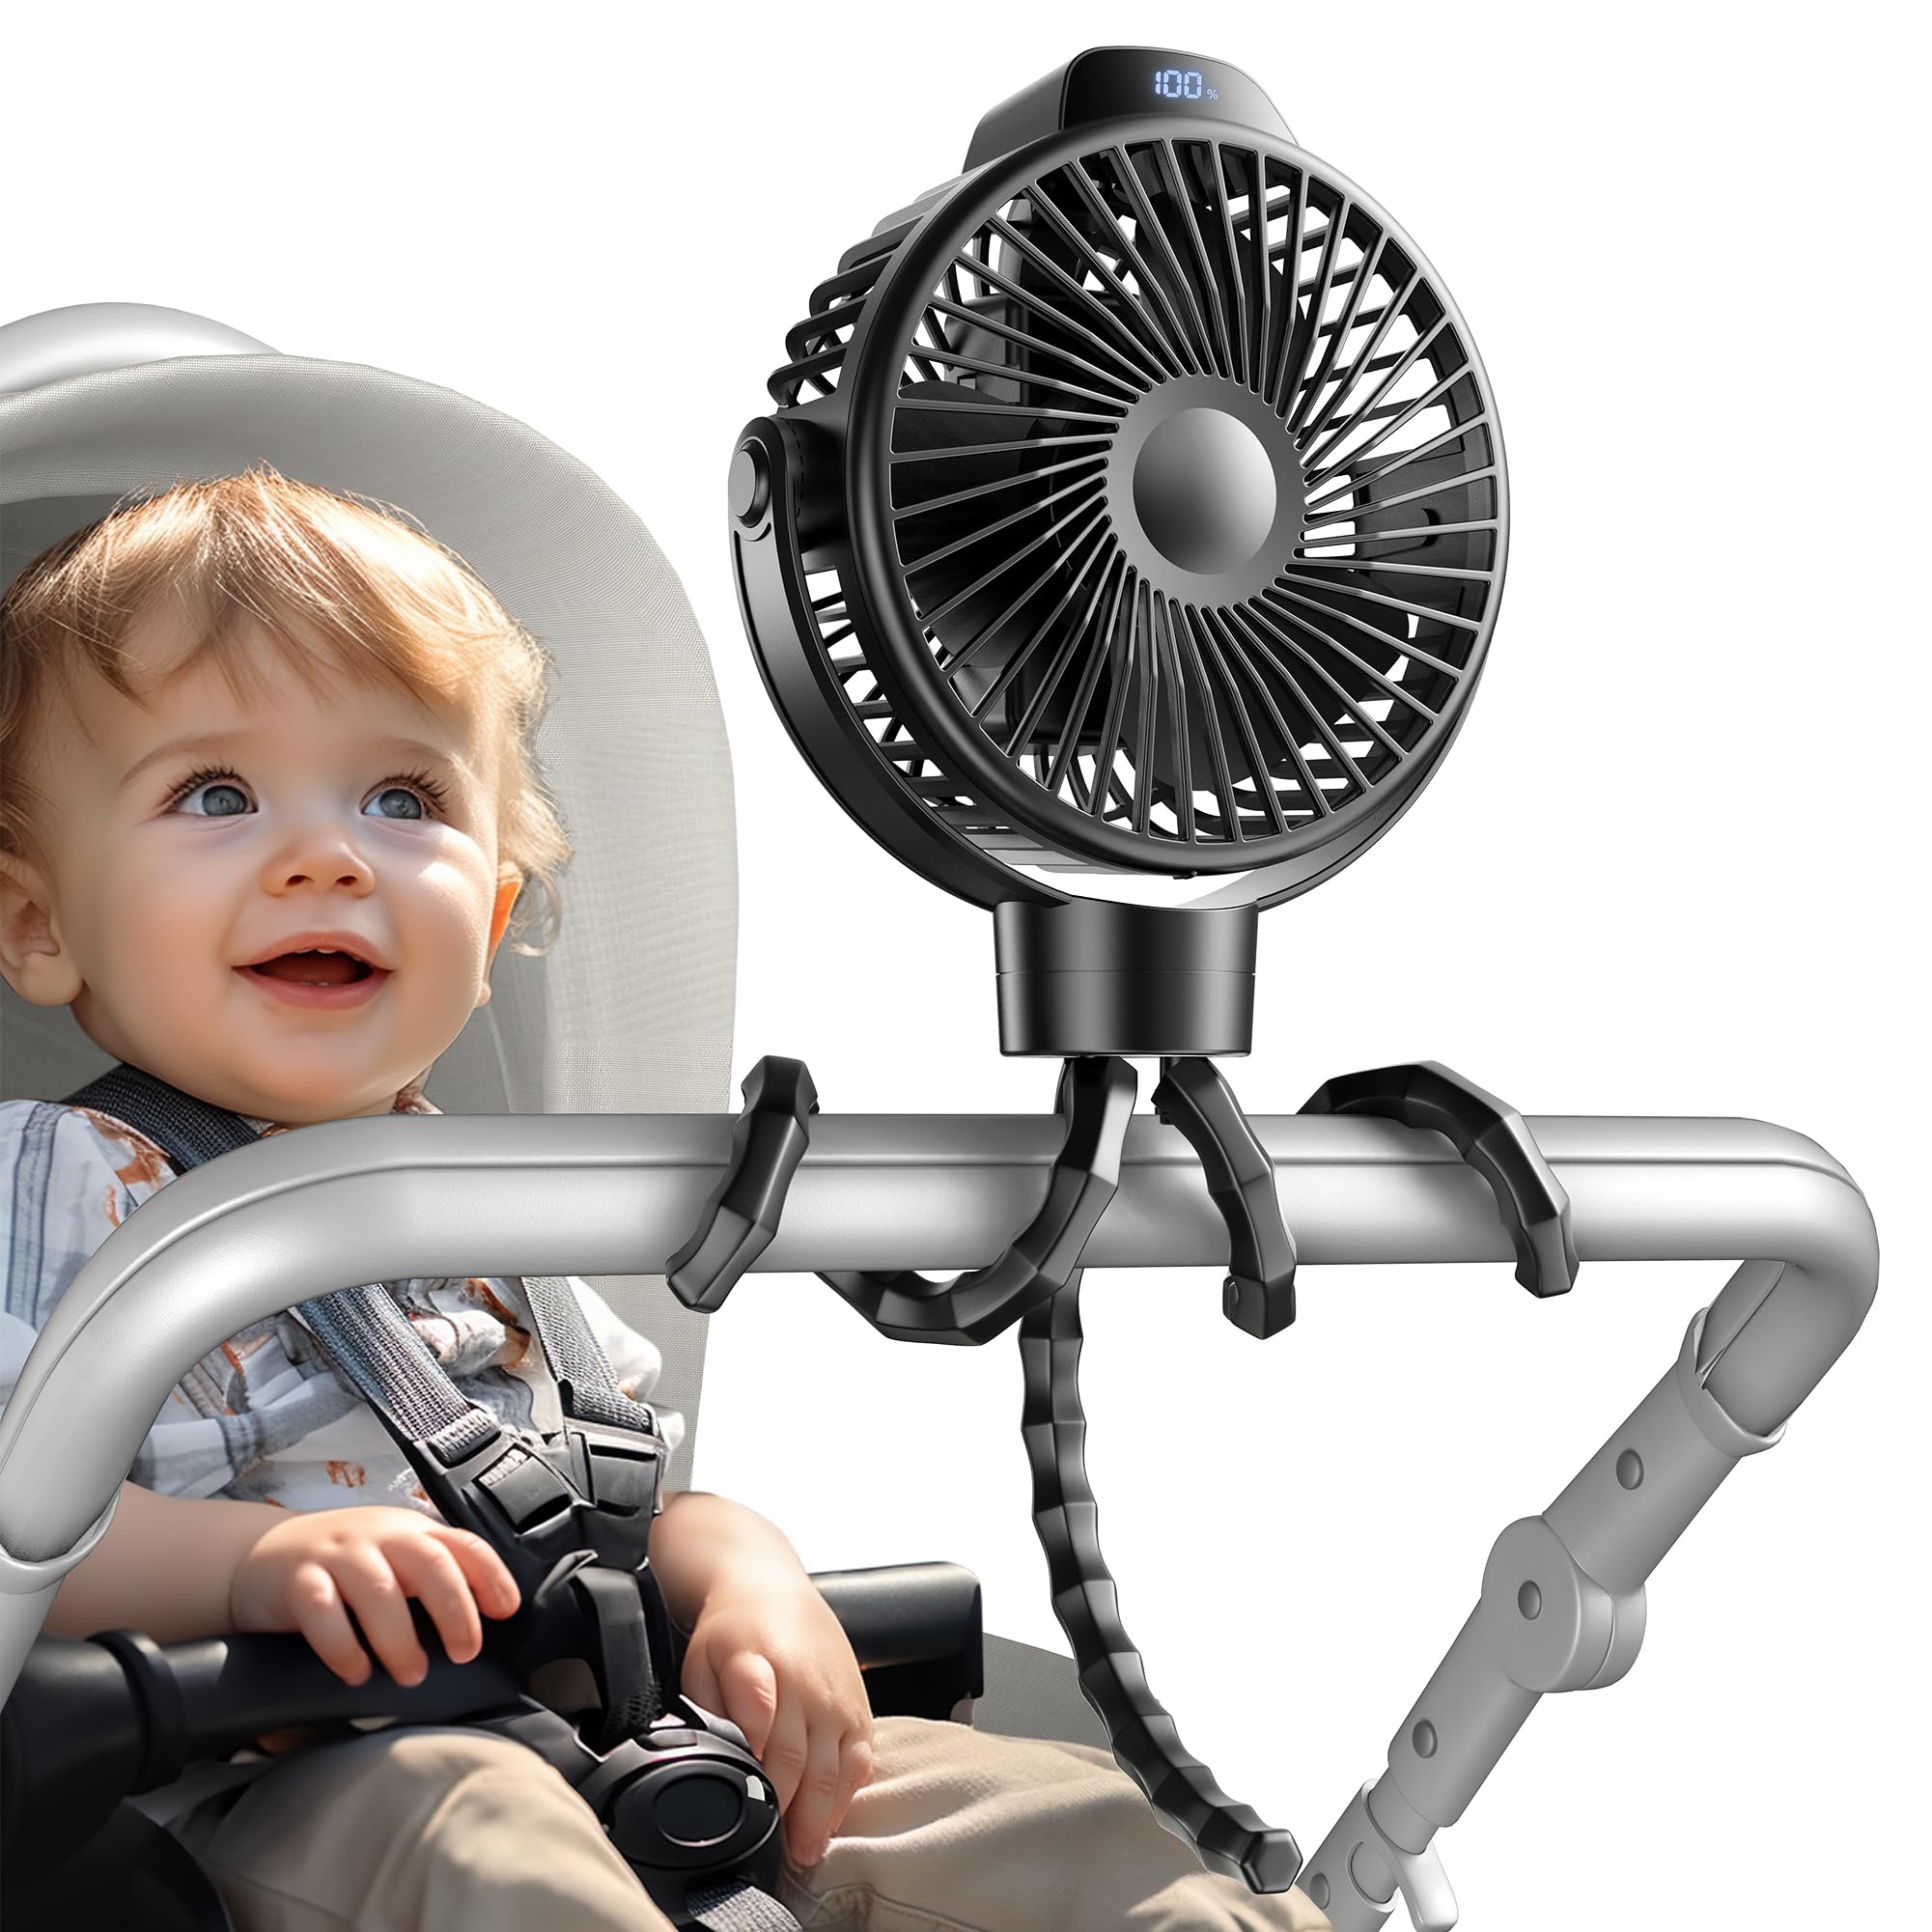 Koonie Astronaut Baby Fan for Stroller, Car Seat Cooling Fan Clip-on with Flexible Tripod, Rechargeable Battery Operated Mini Fan,3 Speeds Strong Airflow (blue)